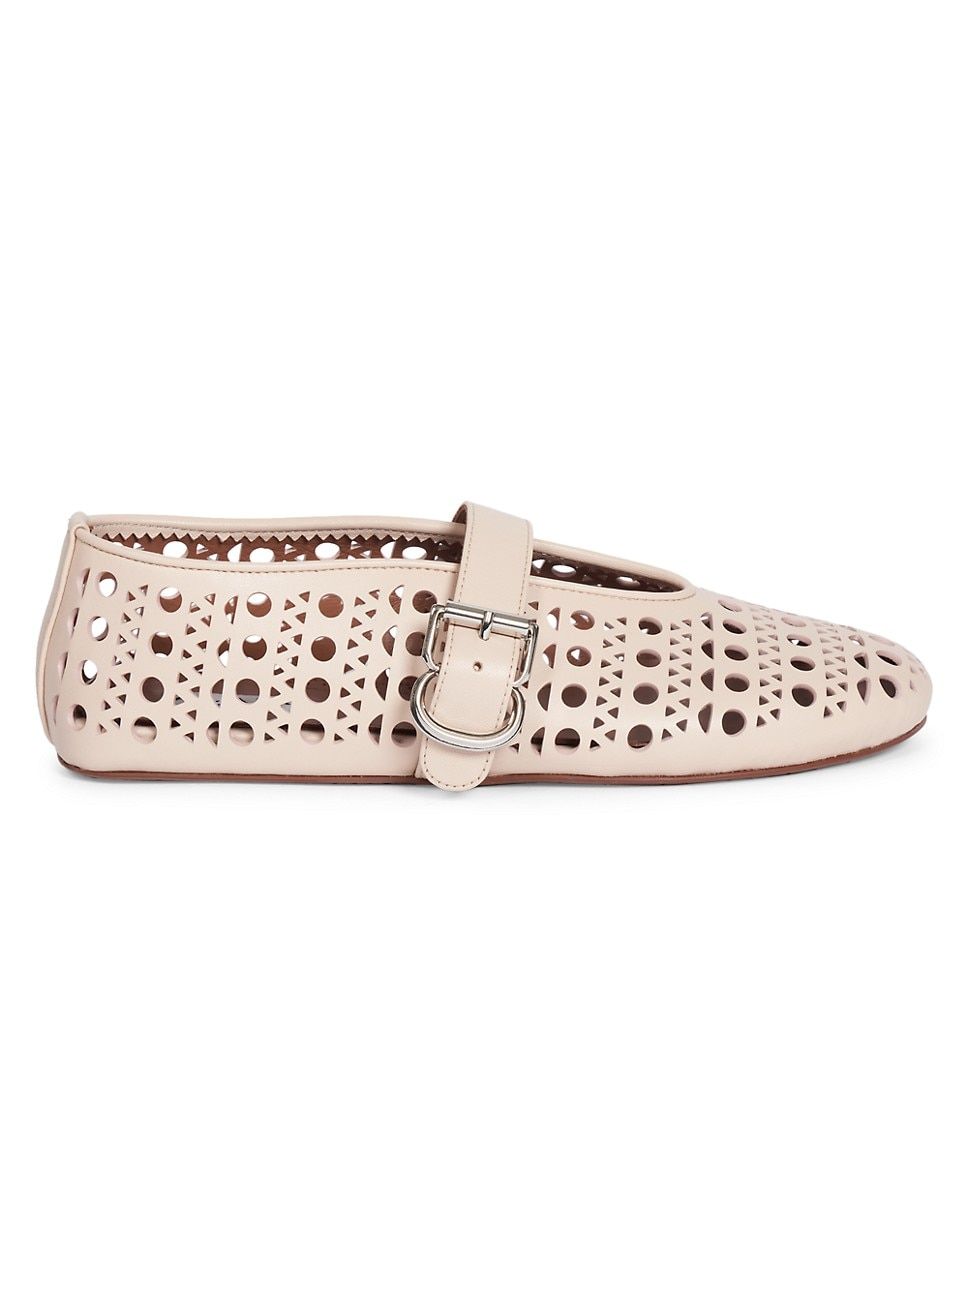 Perforated Leather Ballerina Flats | Saks Fifth Avenue